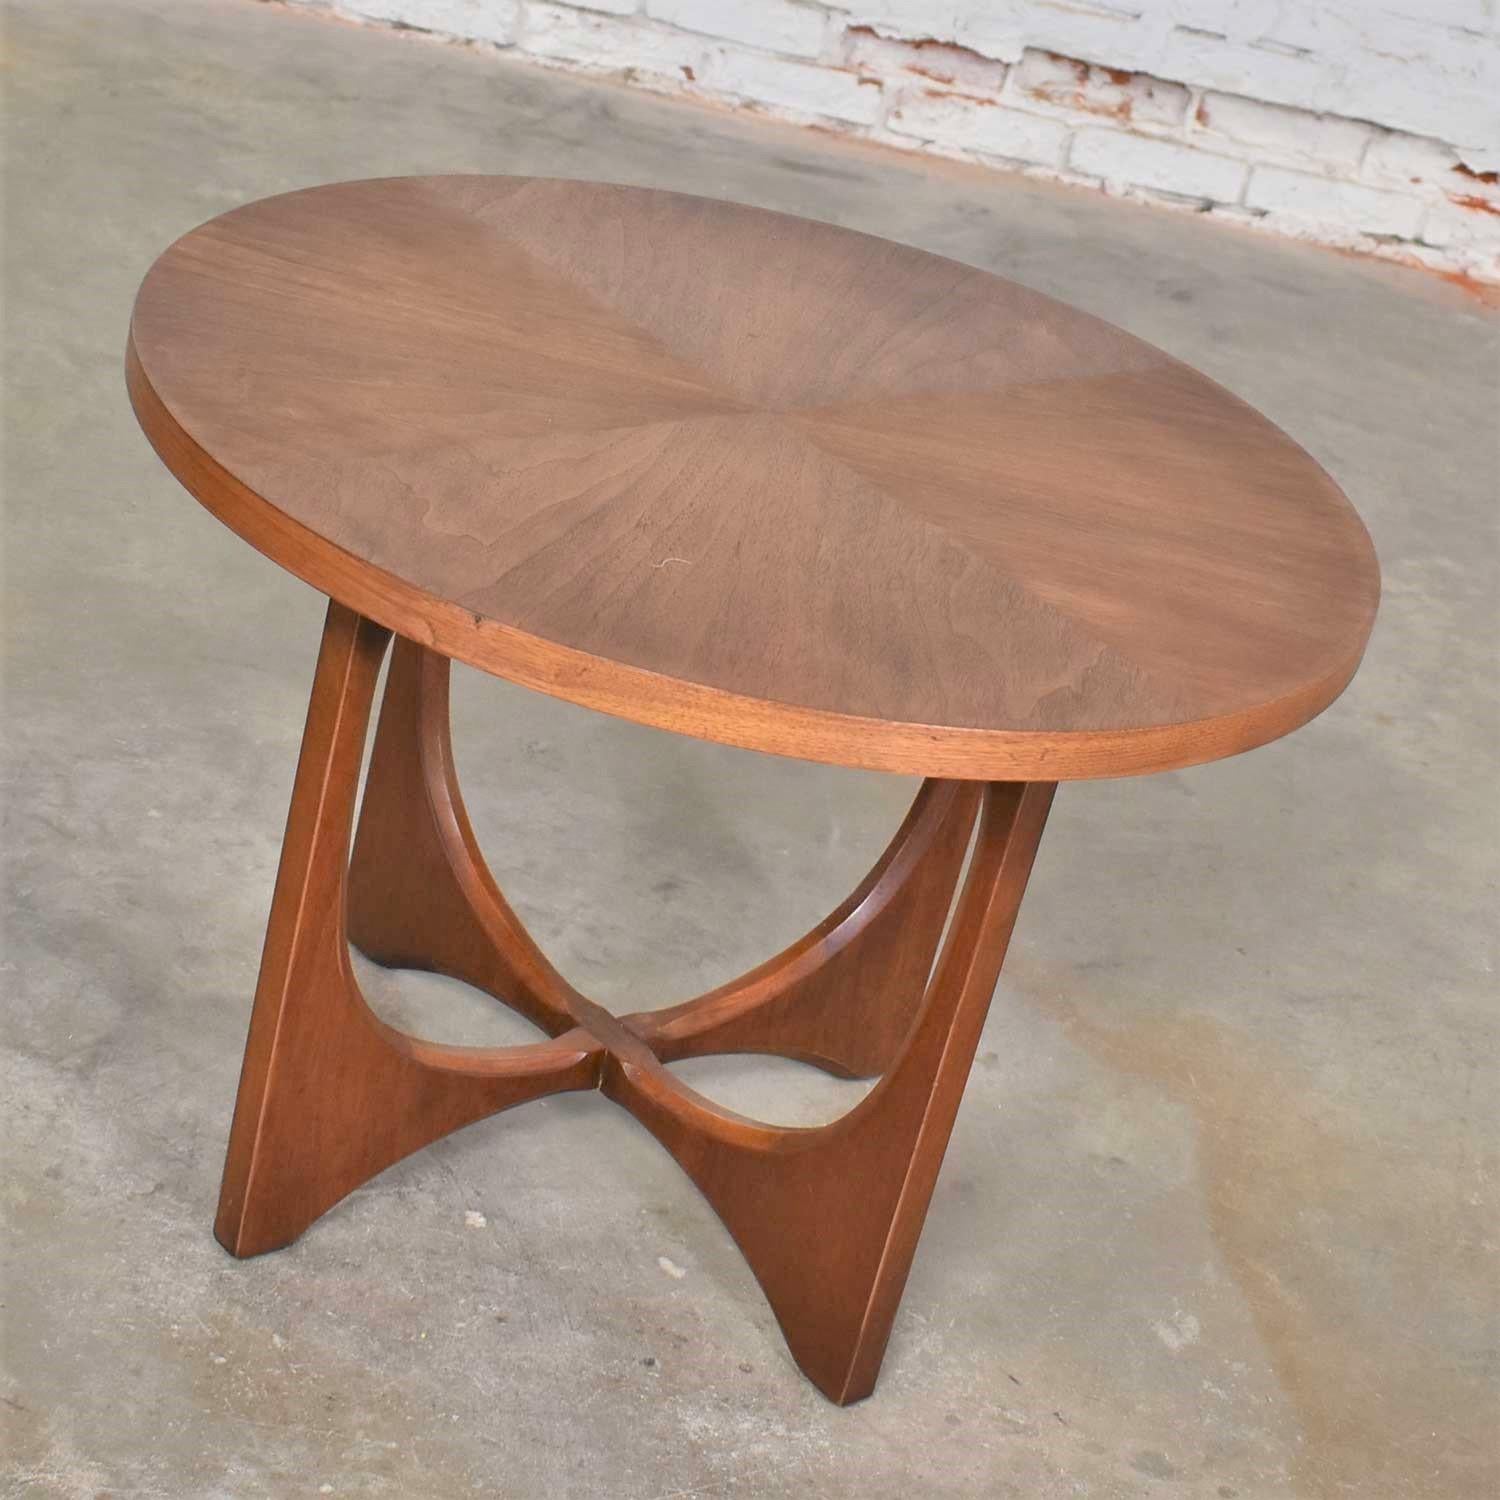 Handsome mid-century modern round lamp table, end table, or side table by Broyhill for their Brasilia collection. It is in fabulous vintage condition. The top has been refinished and restored and the base restored. They still retain a warm vintage